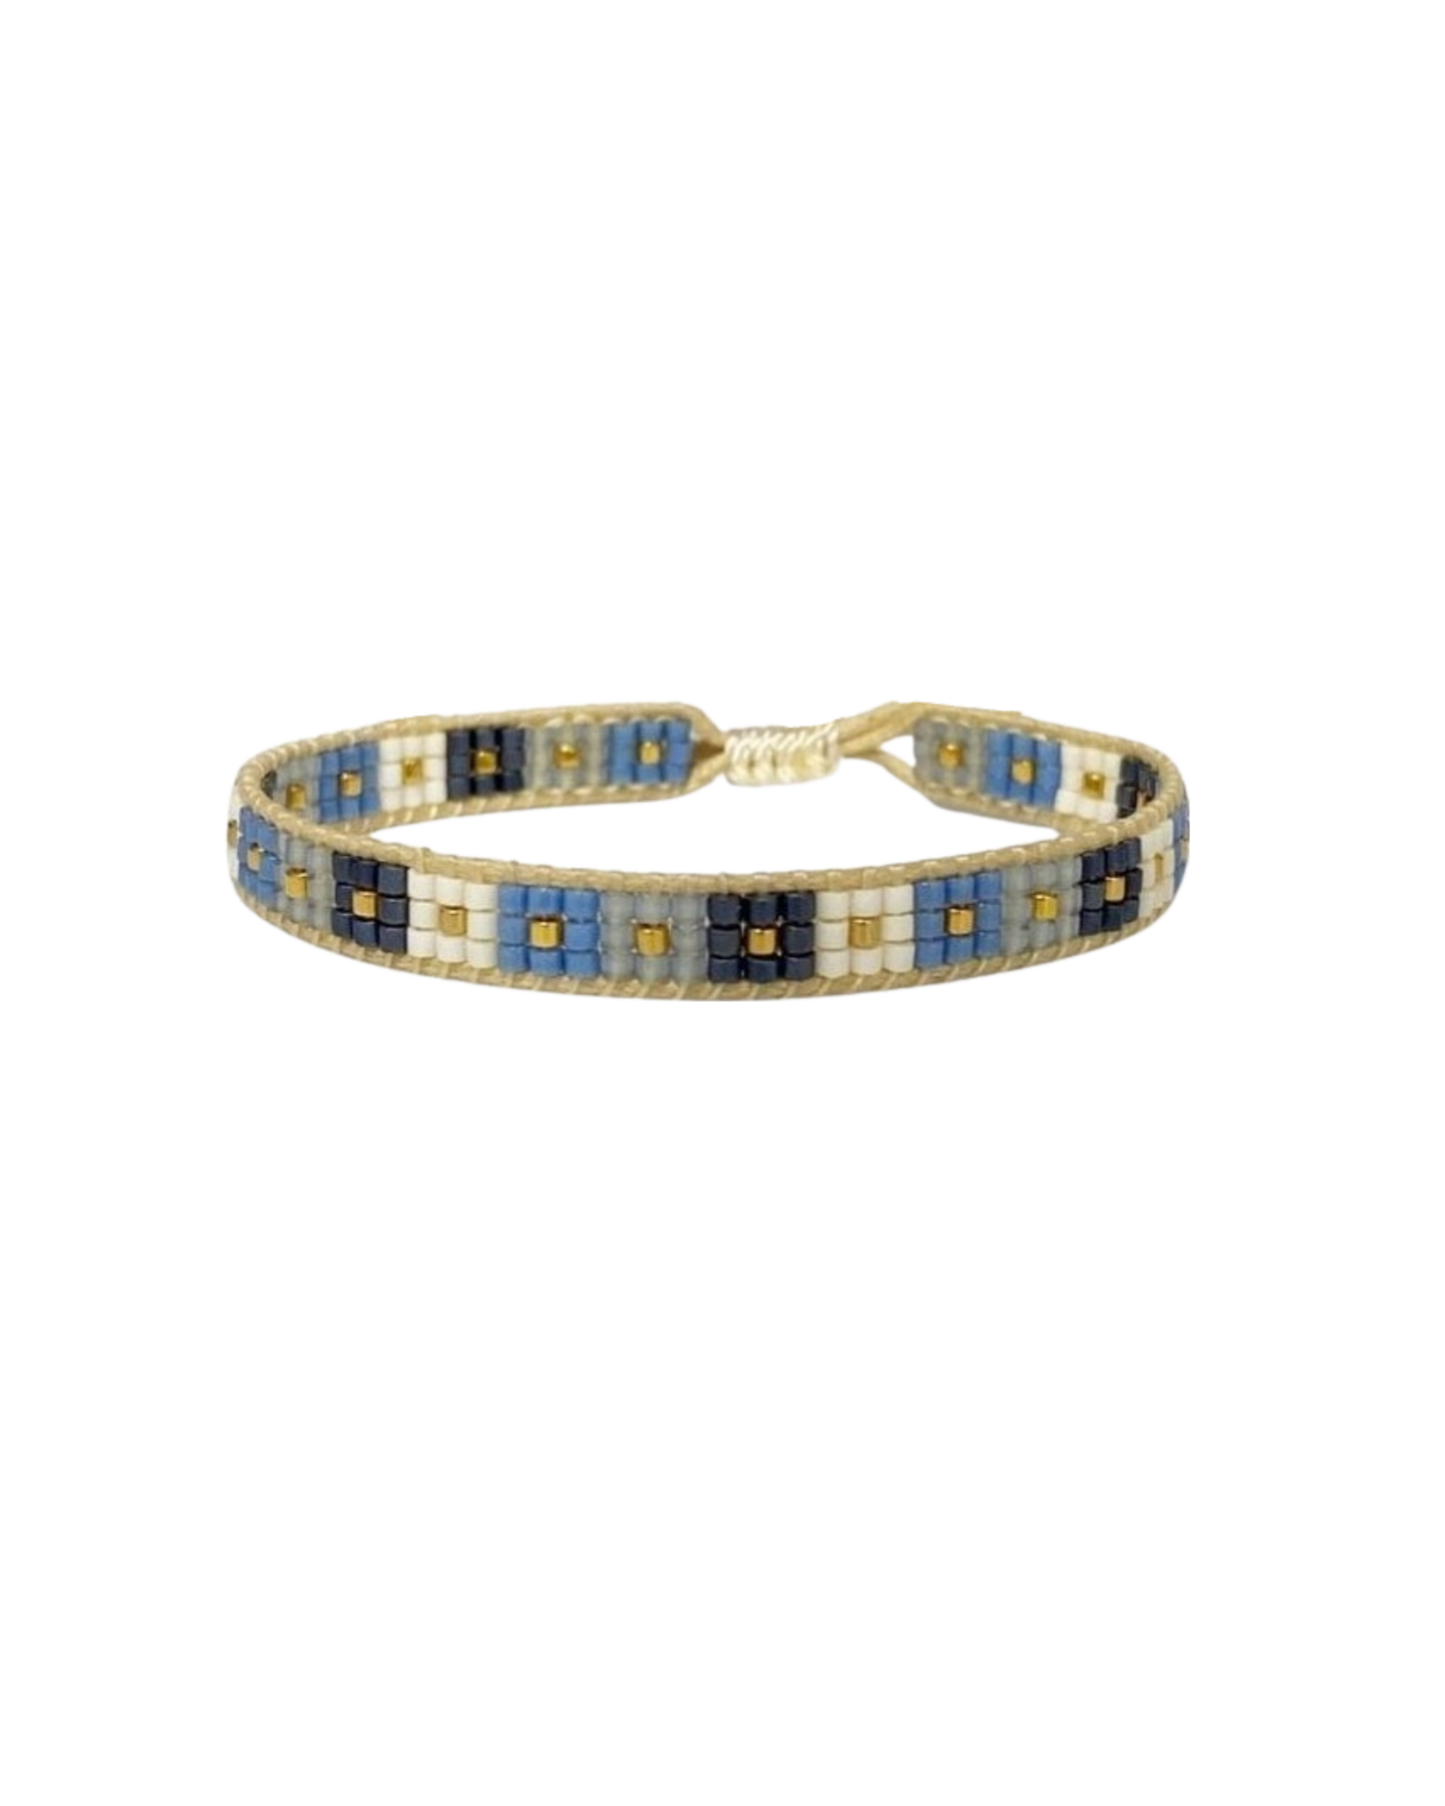 beaded-bracelet with checkered design in blue tones